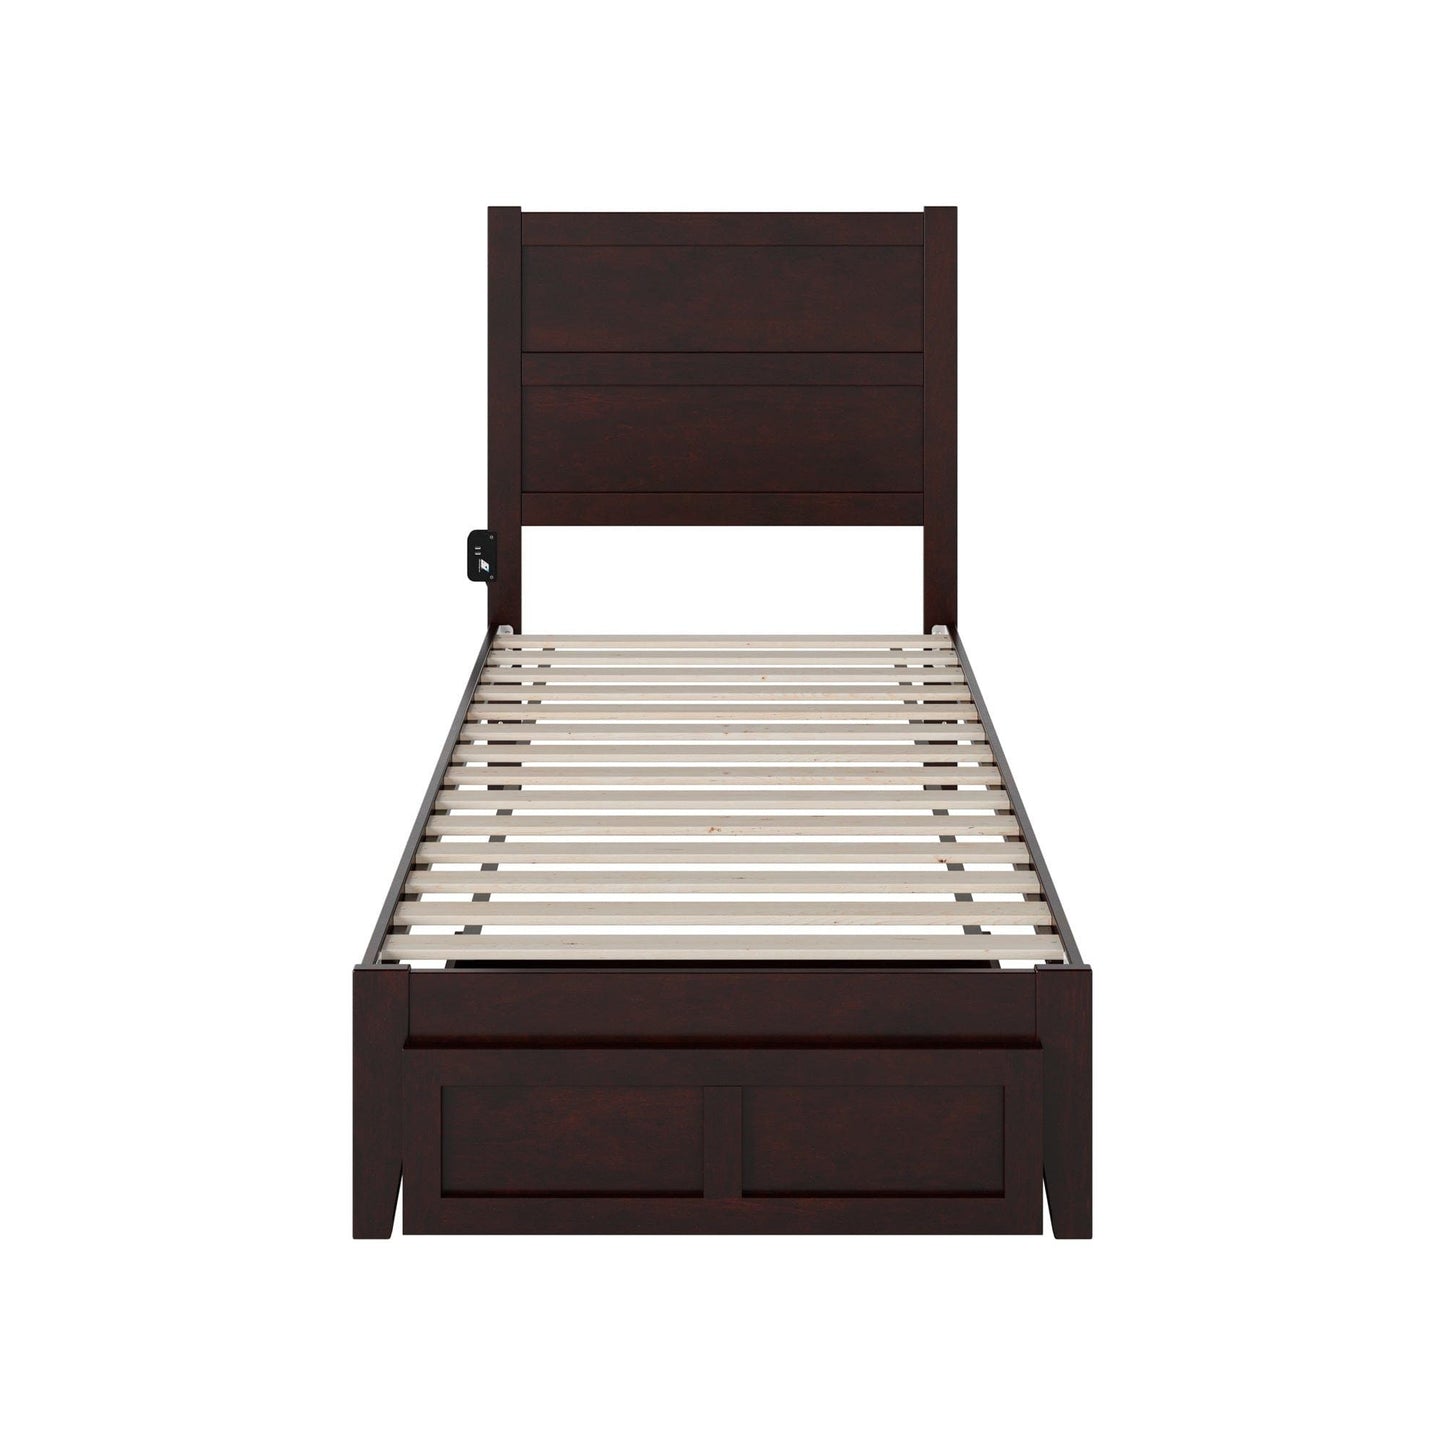 AFI Furnishings NoHo Twin Extra Long Bed with Foot Drawer in Espresso AG9112411